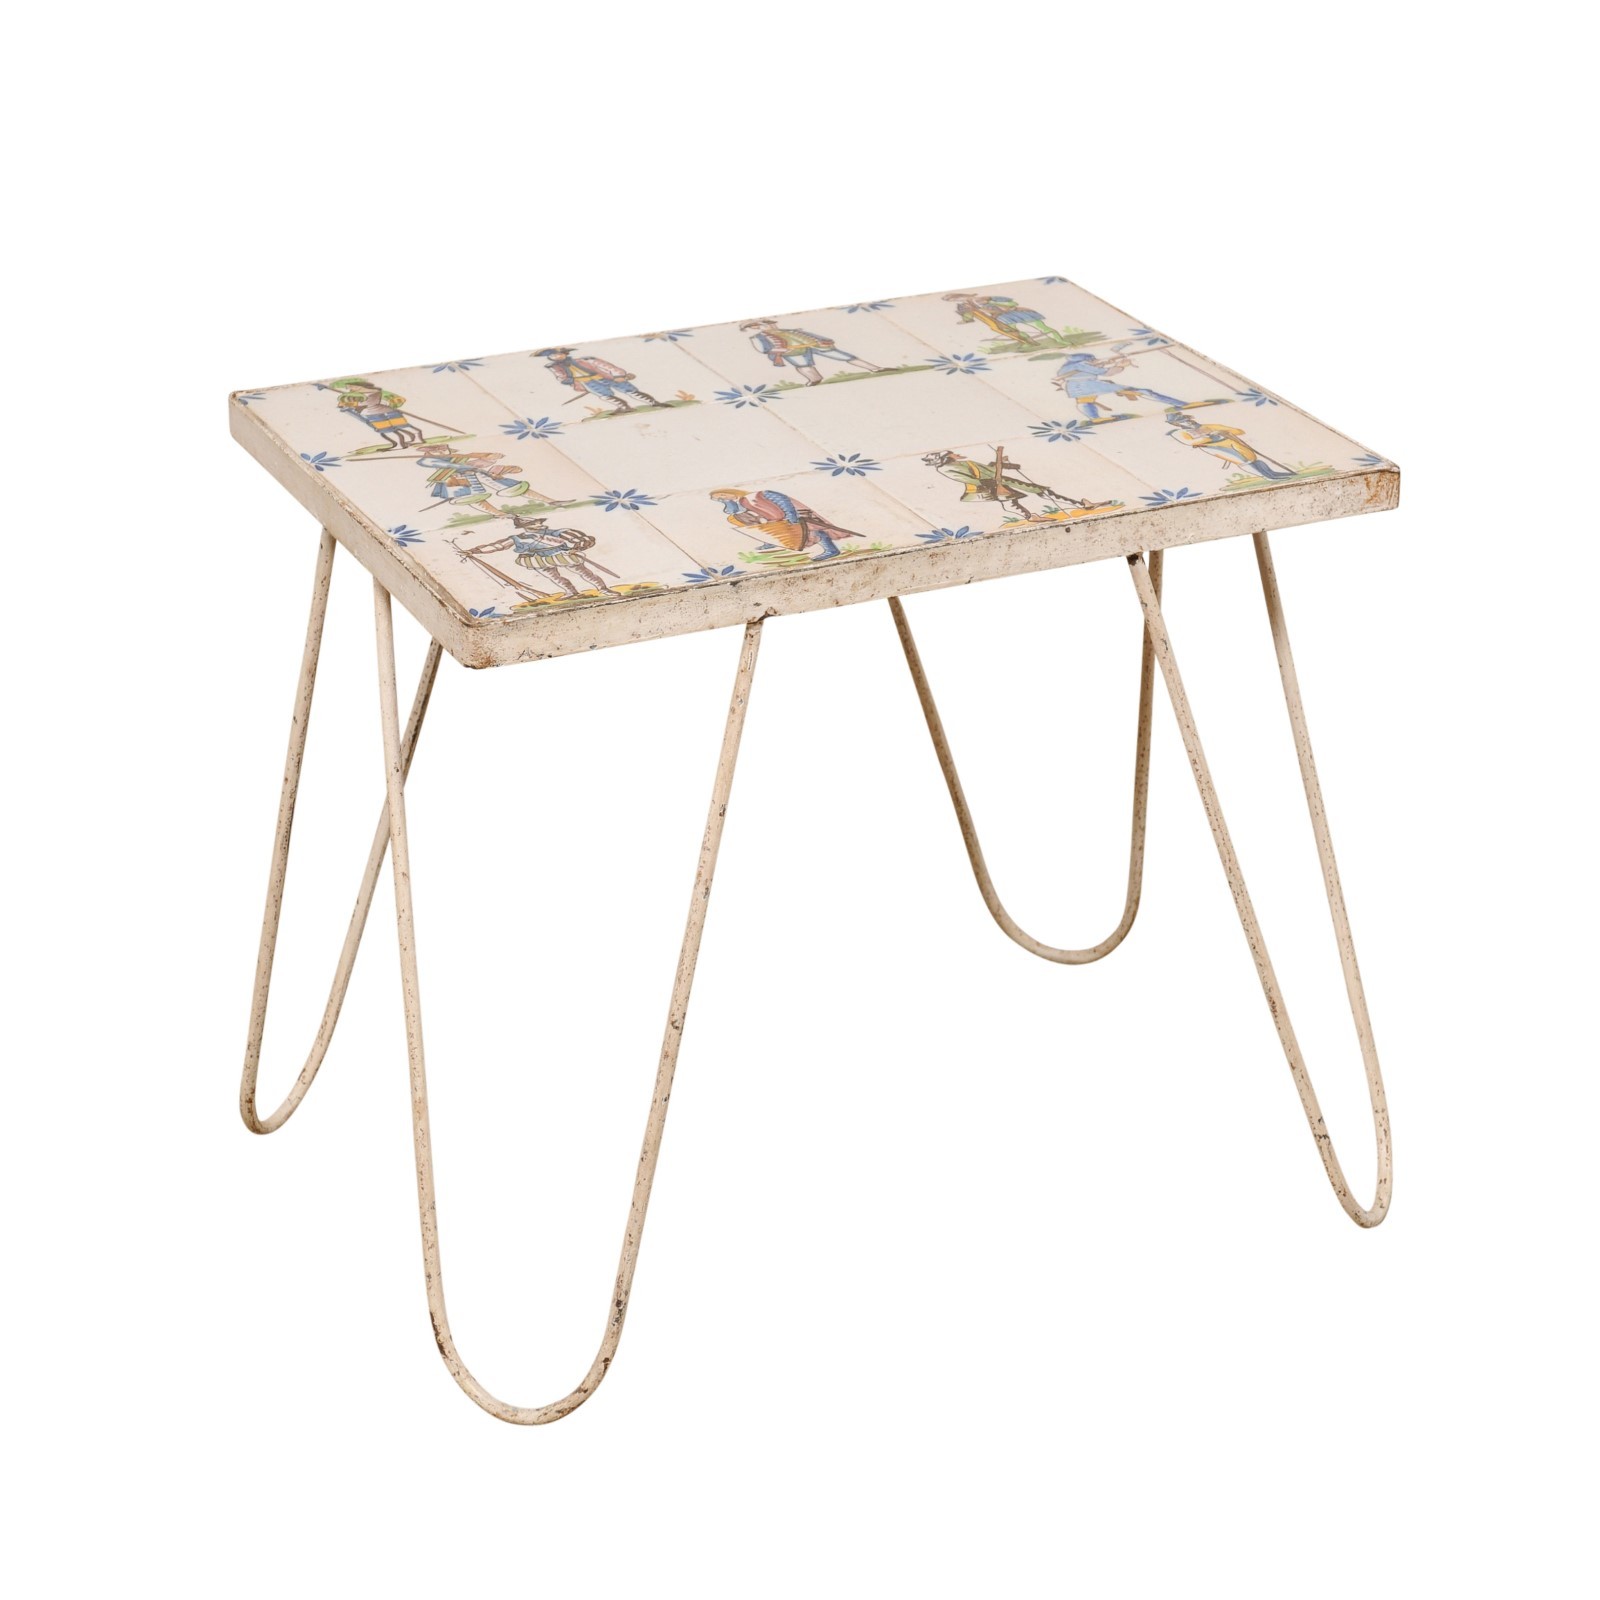 Spanish Painted-Tile Top Metal Side Table